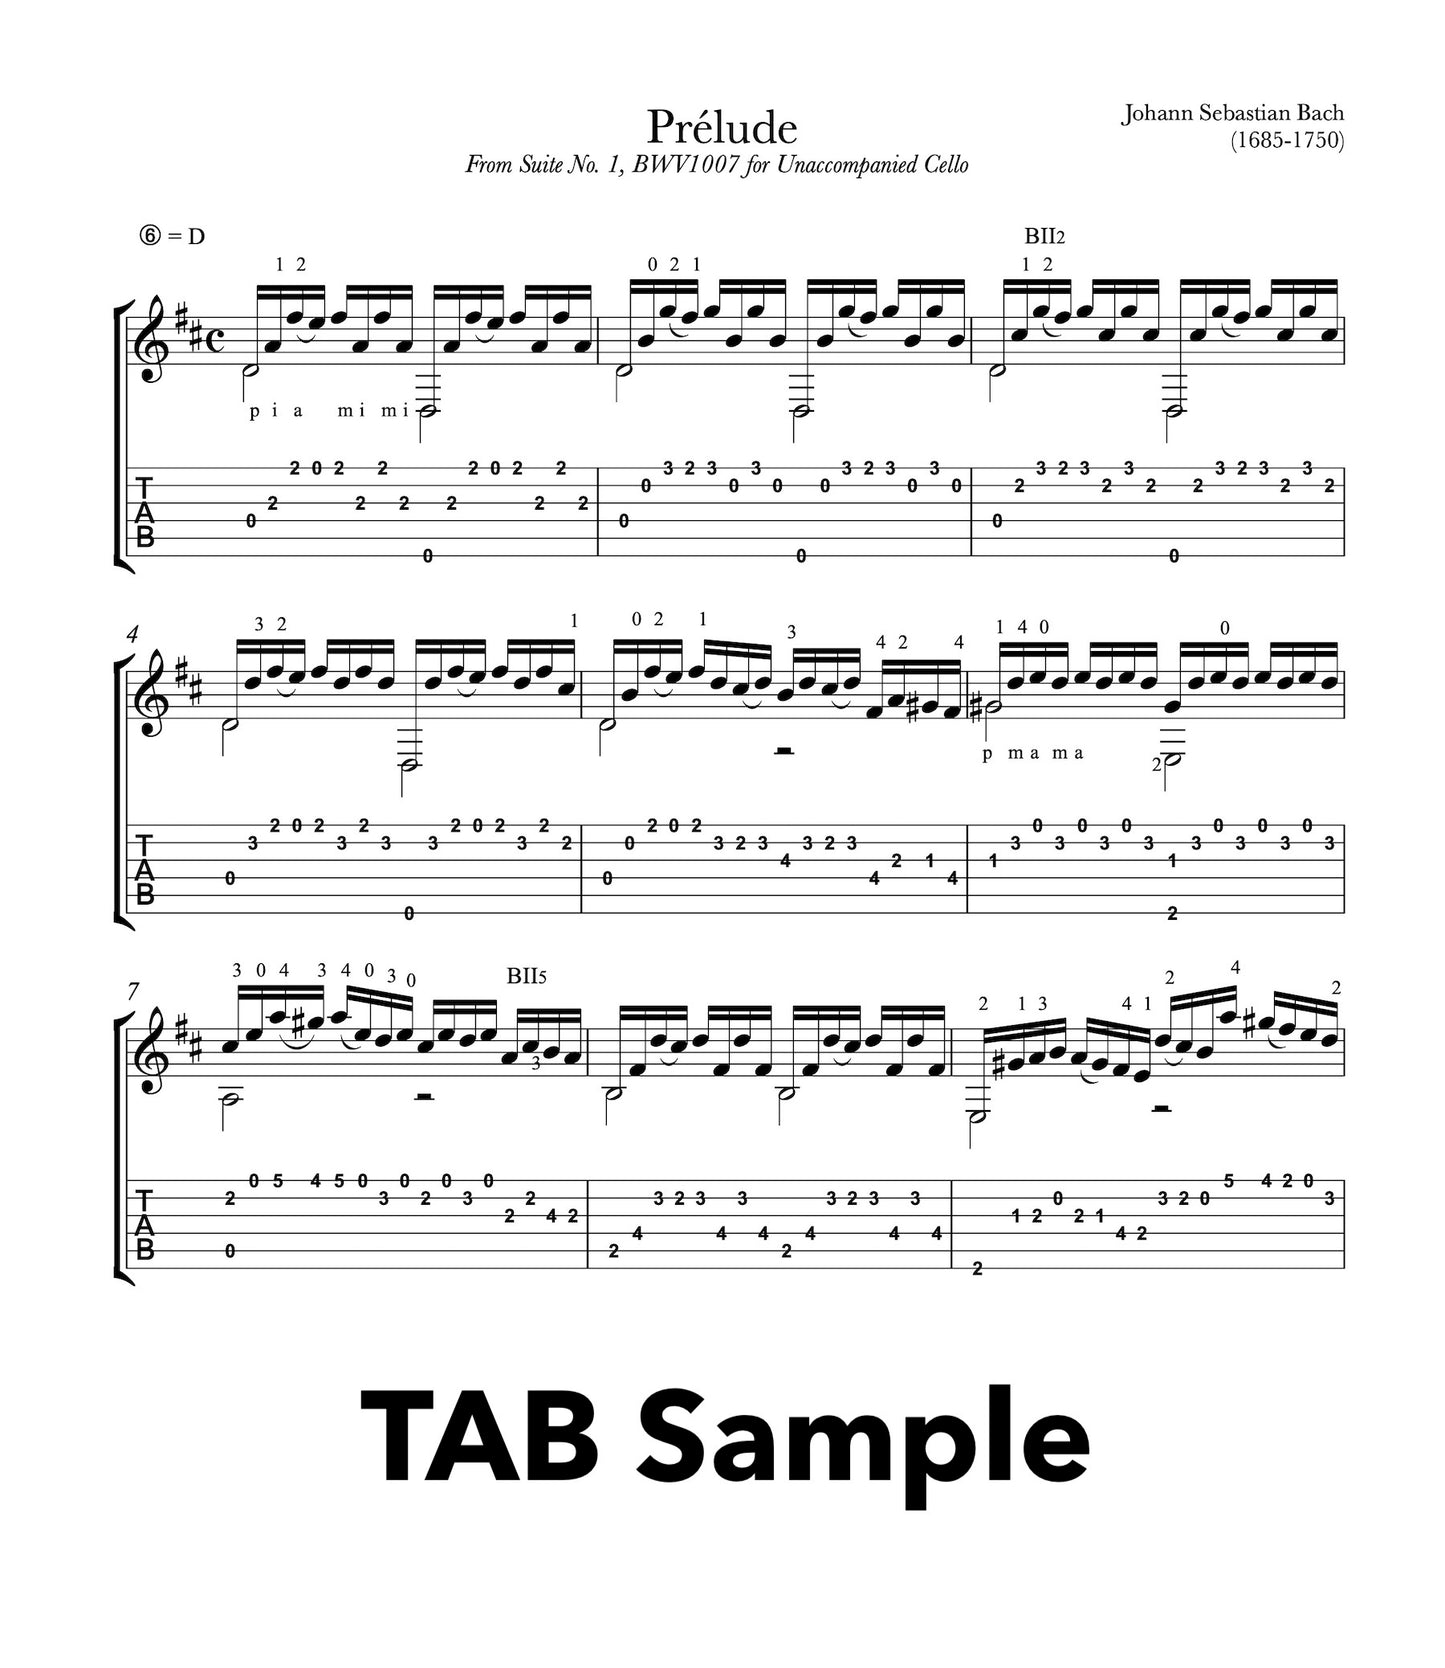 Prelude Cello Suite BWV 1007 for Guitar (TAB Sample))